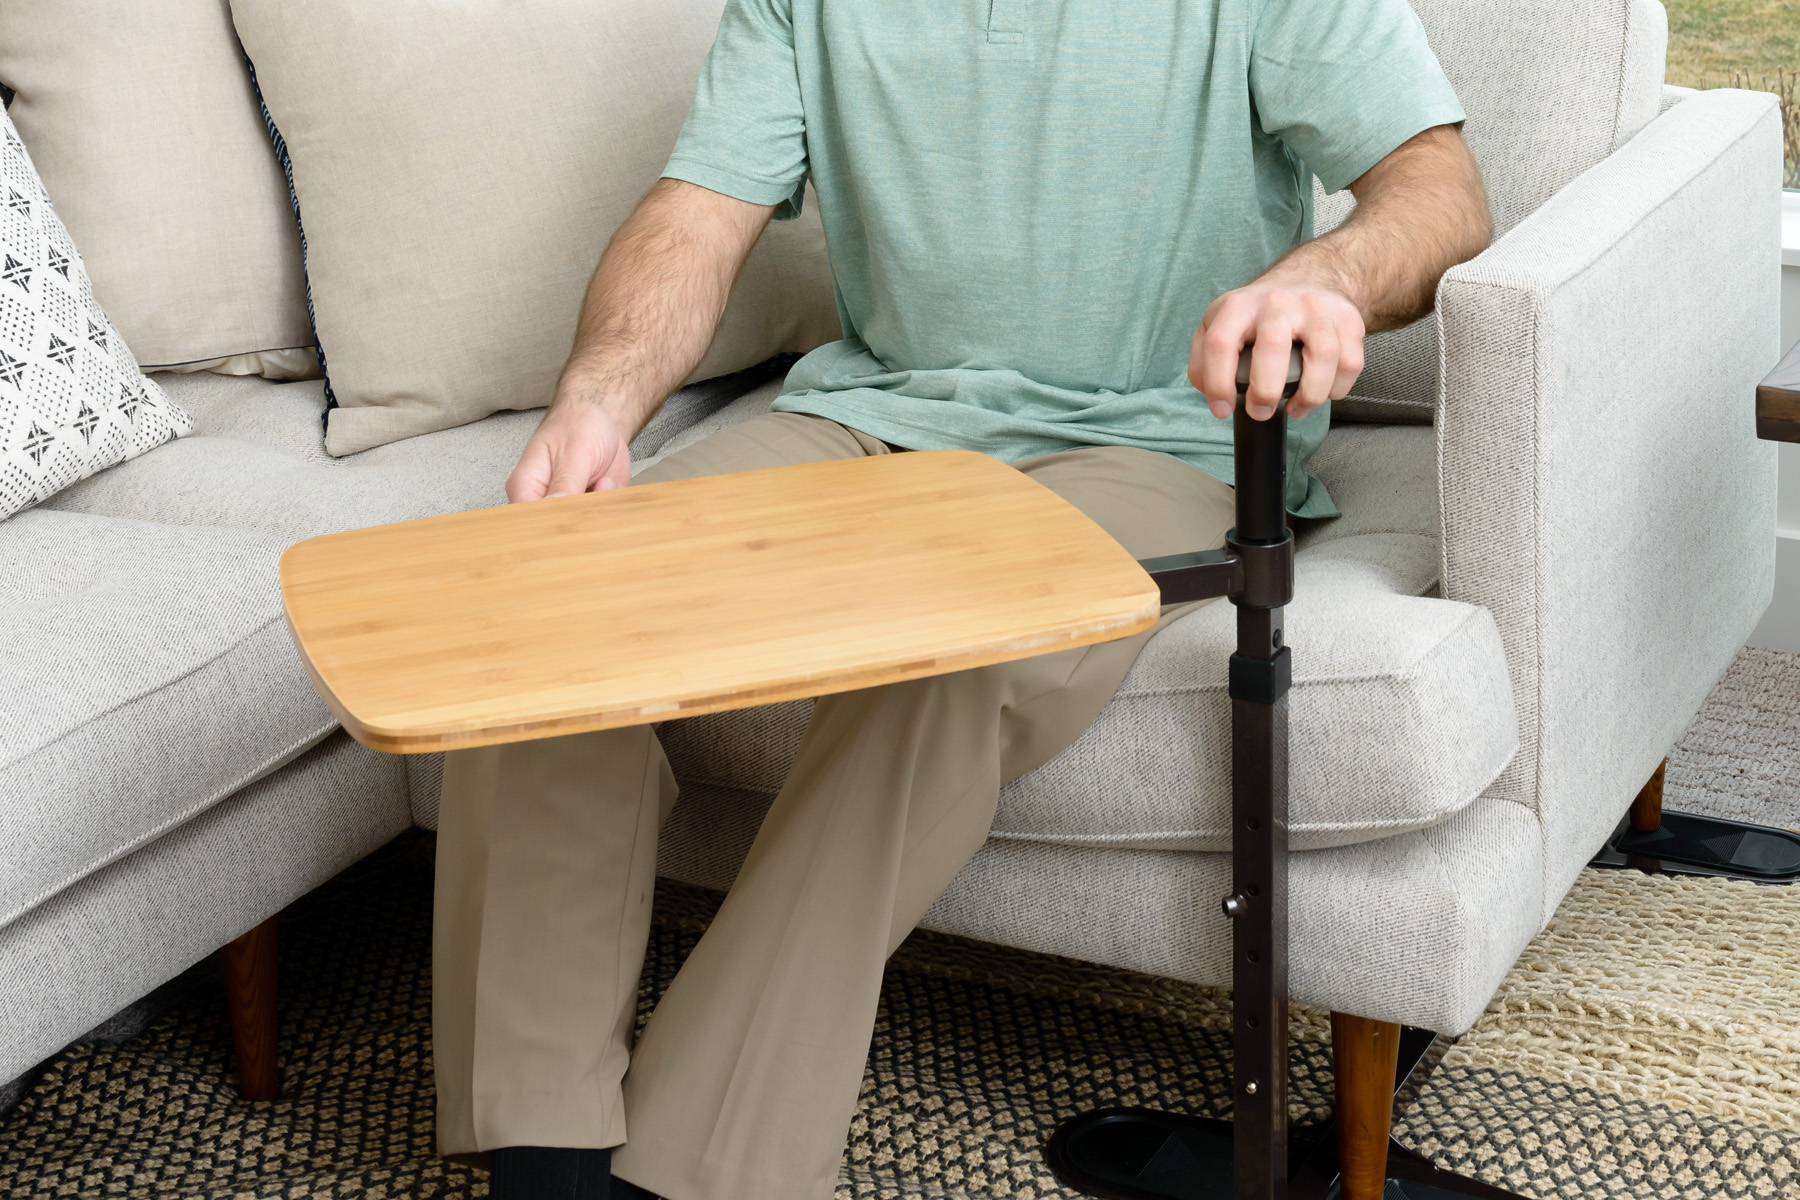 Standers Assist-A-Tray Standing Aid with Tray couch cane handle